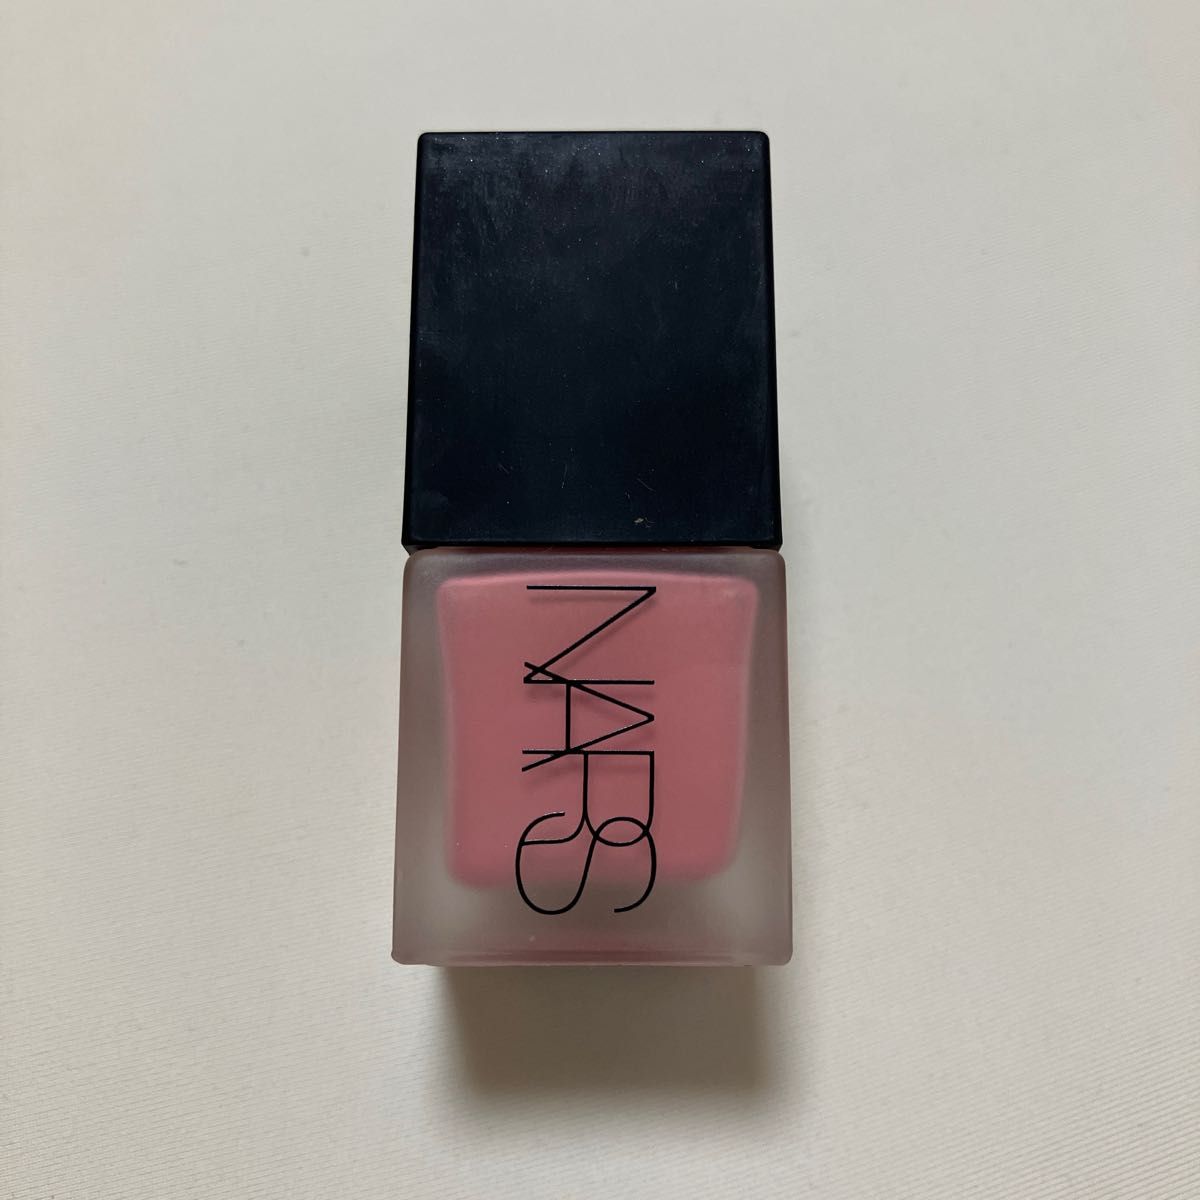 NARS リキッドブラッシュ（5155 ピーチピンク）